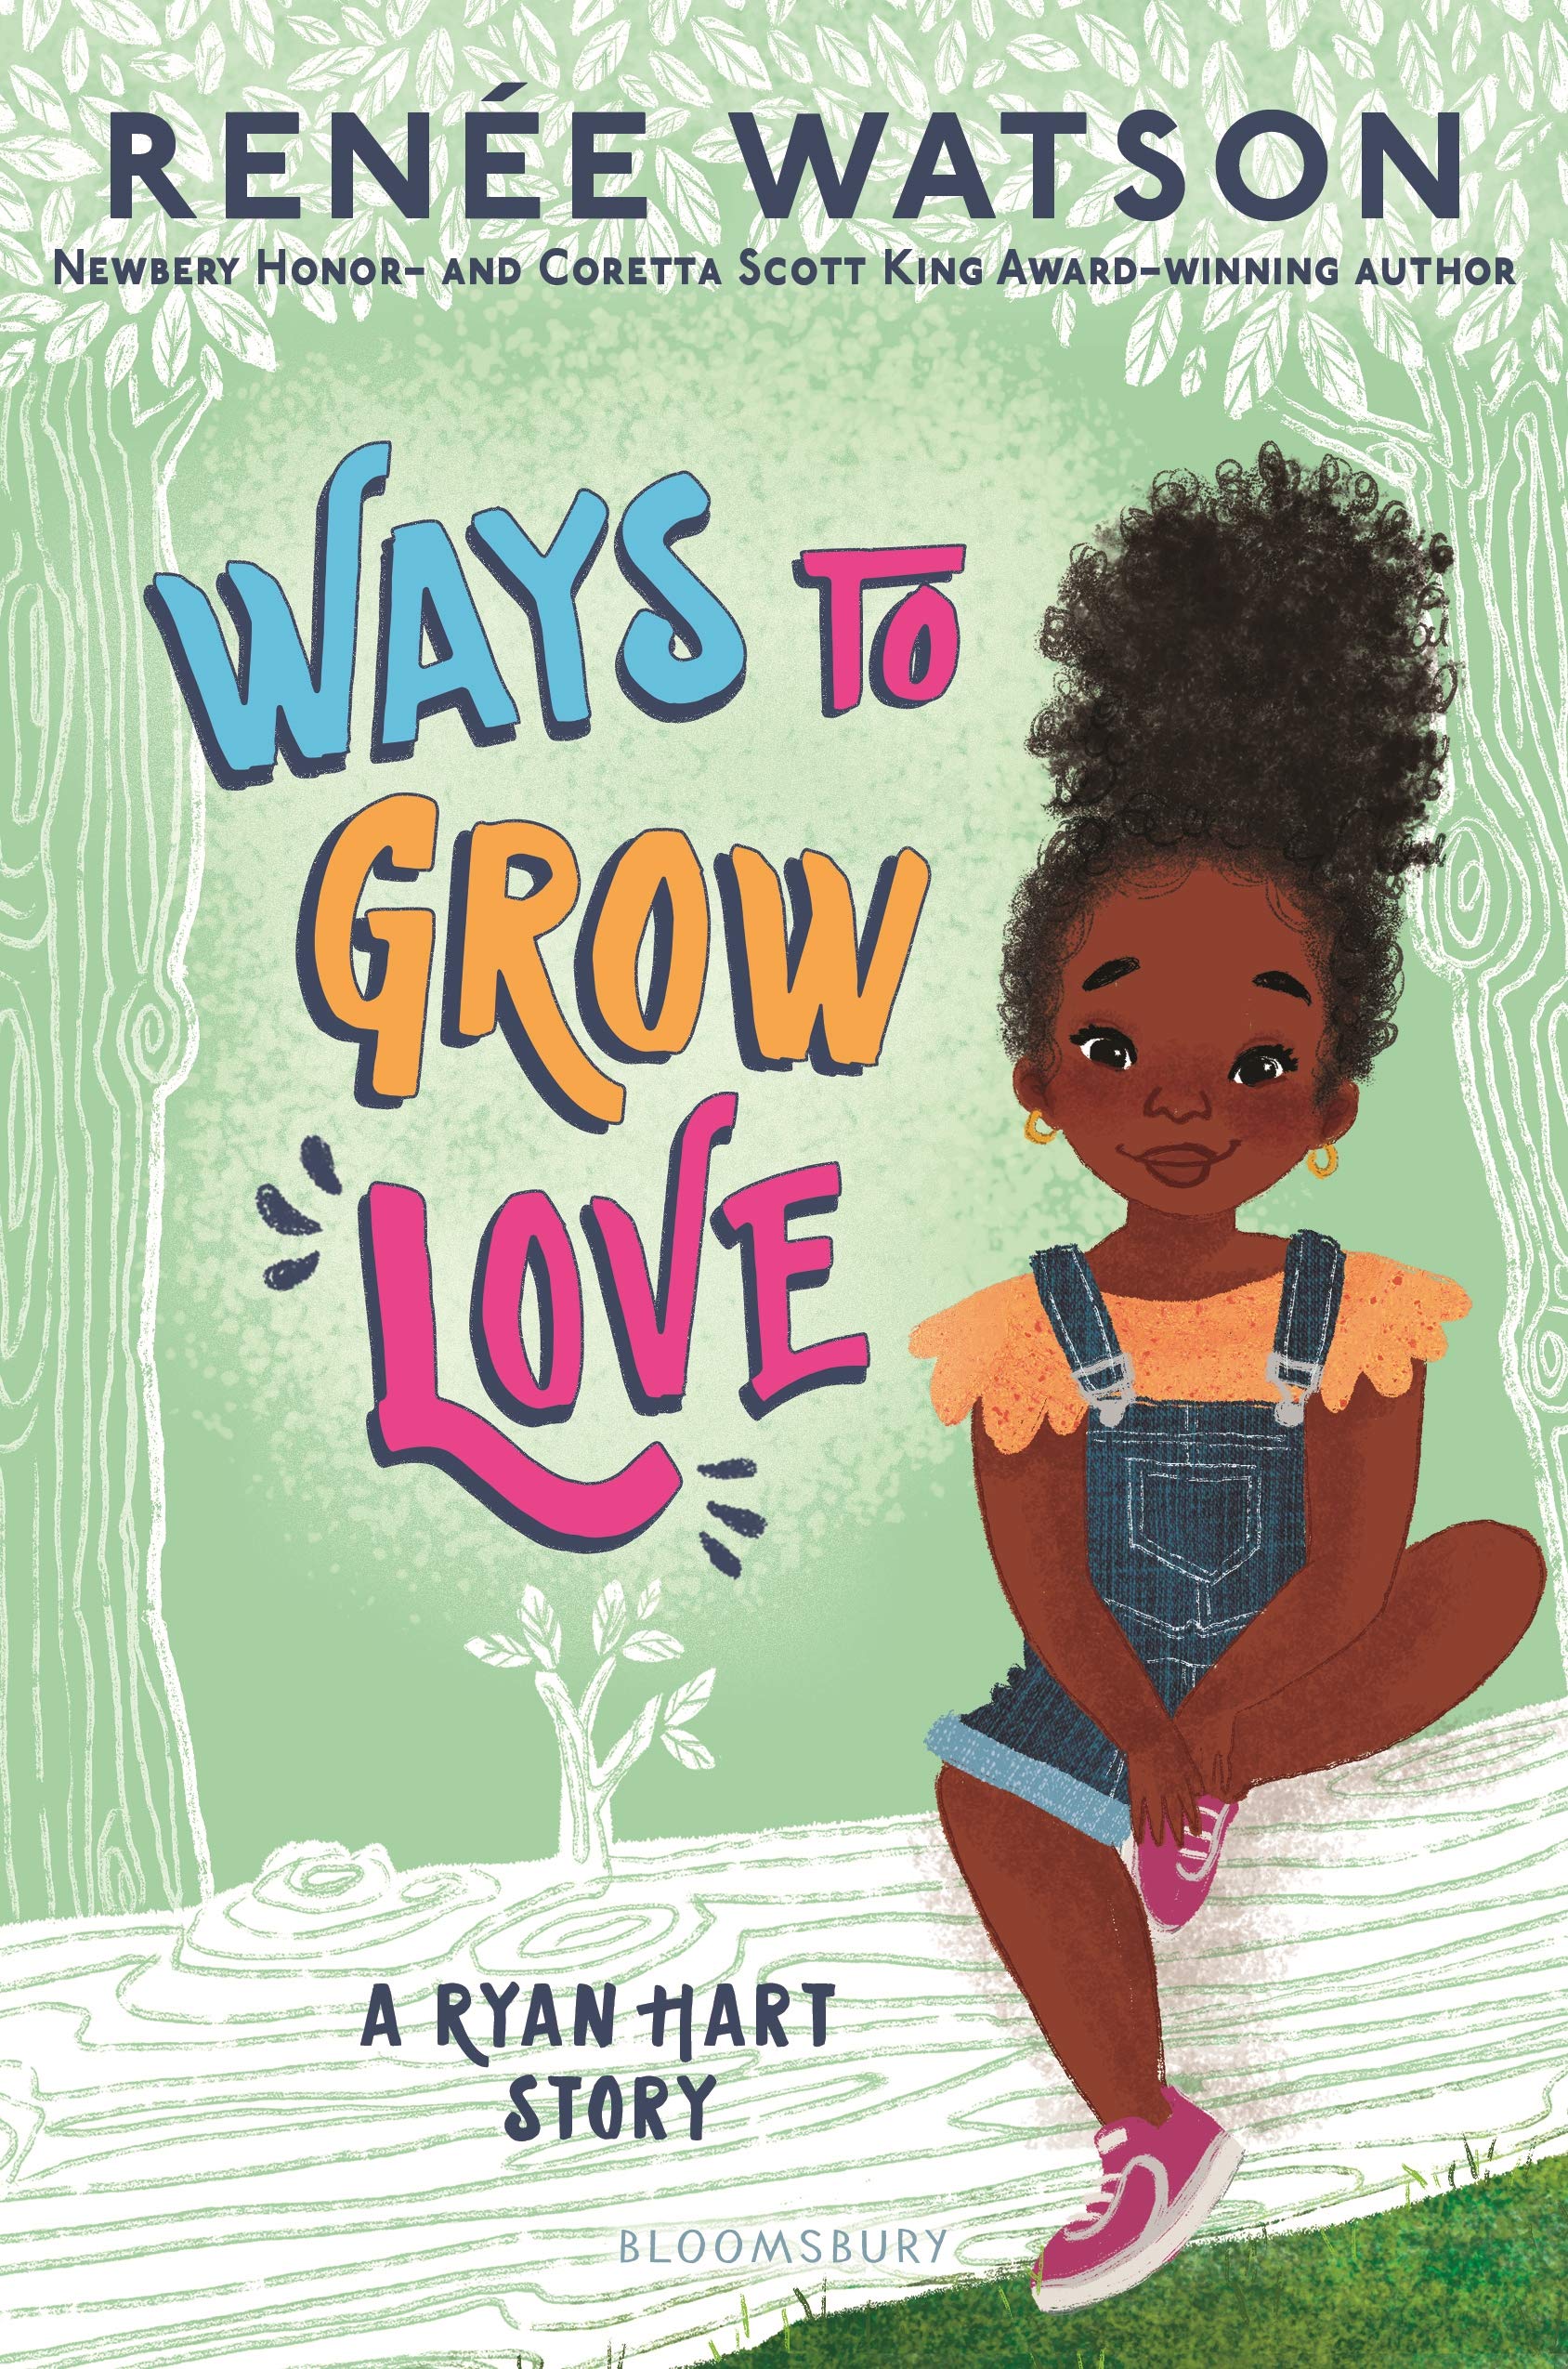 Image for "Ways to Grow Love"